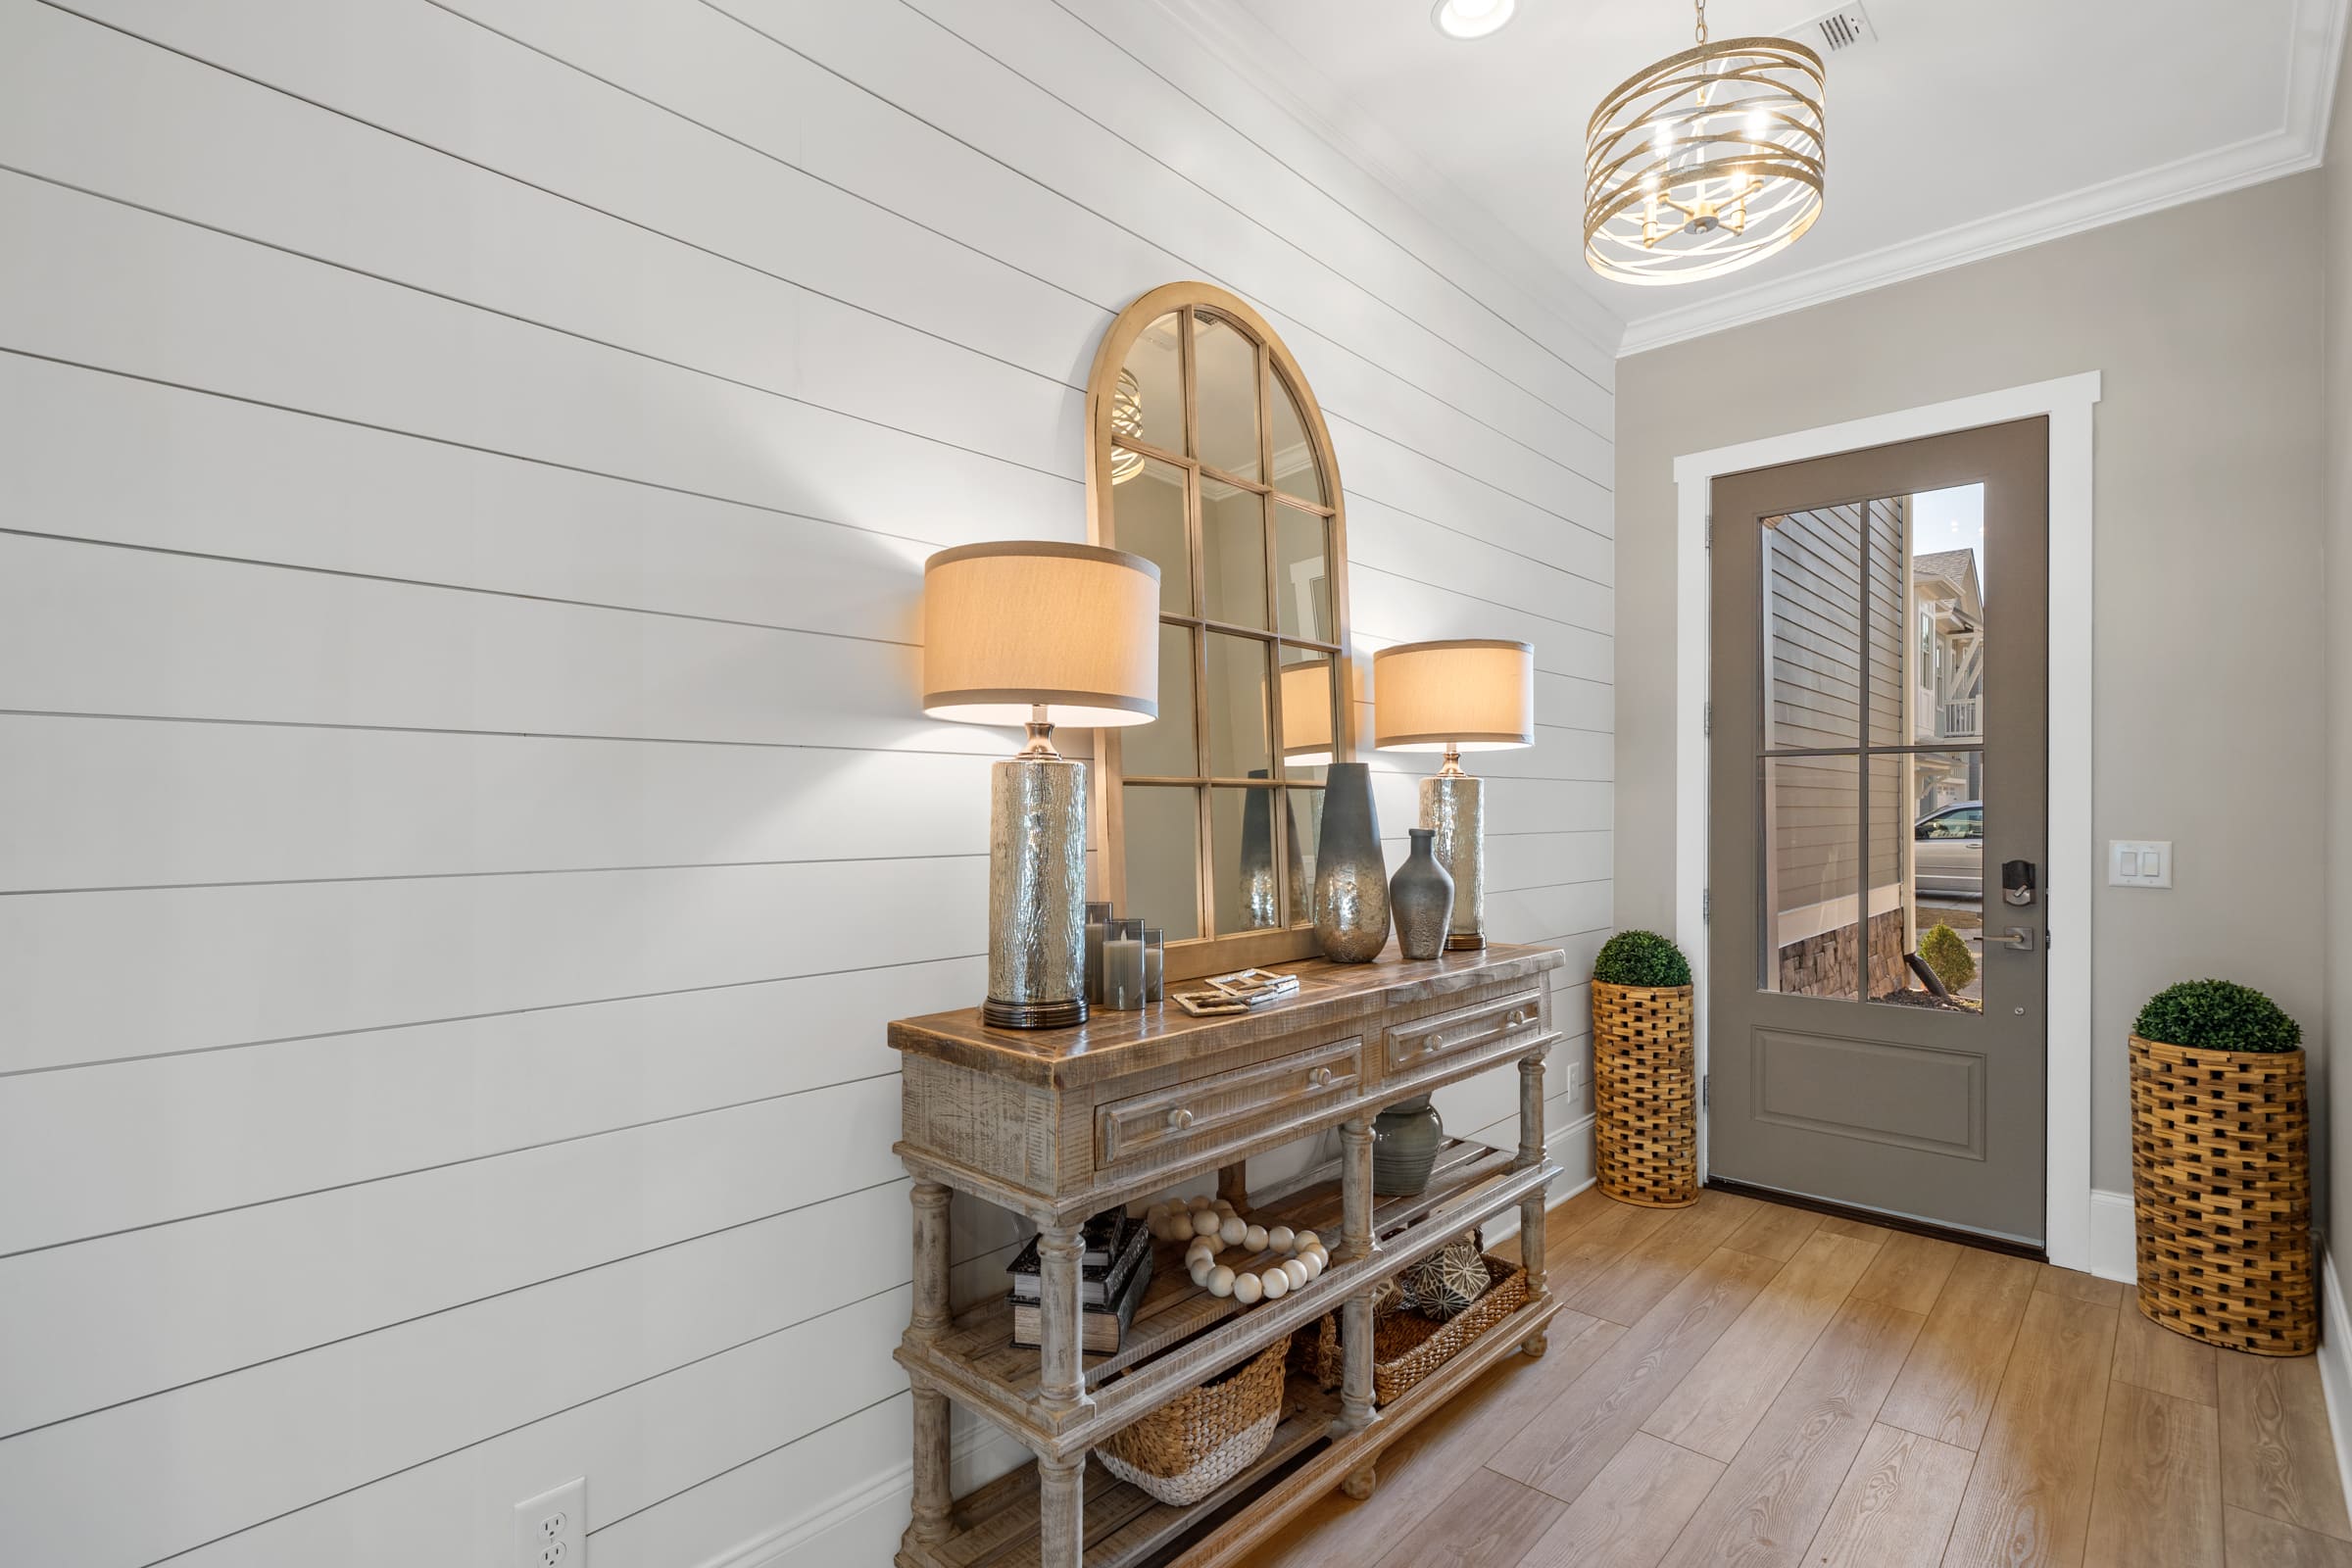 Front Door Entrance with Large Paneled Wall and Unique Light |PAXISgroup